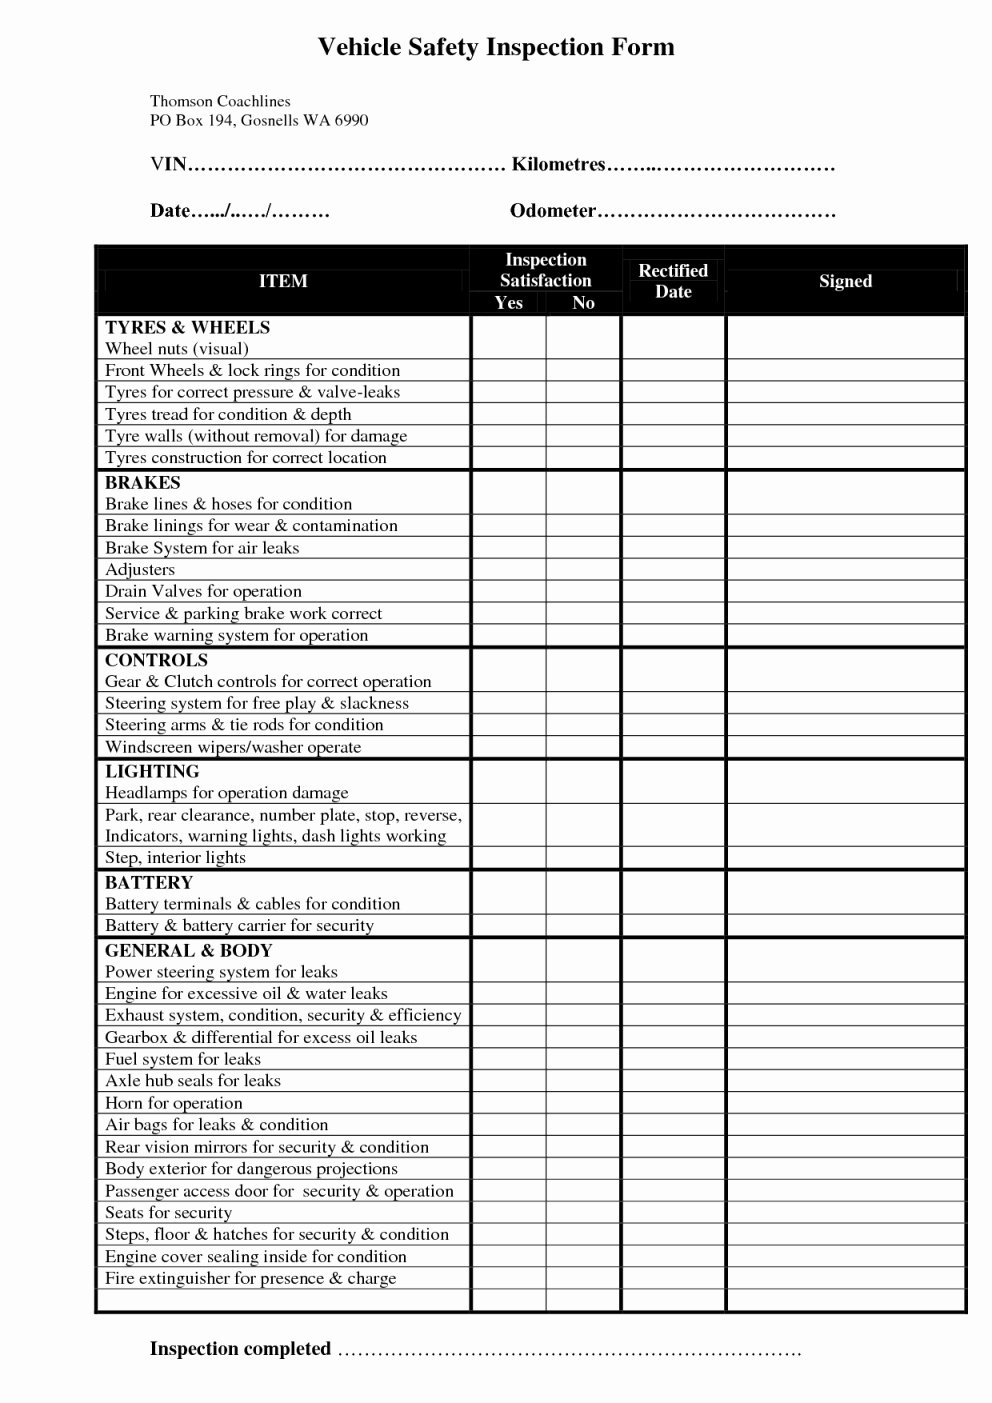 Apr Cad Vehicle Safety Inspection Checklist Template